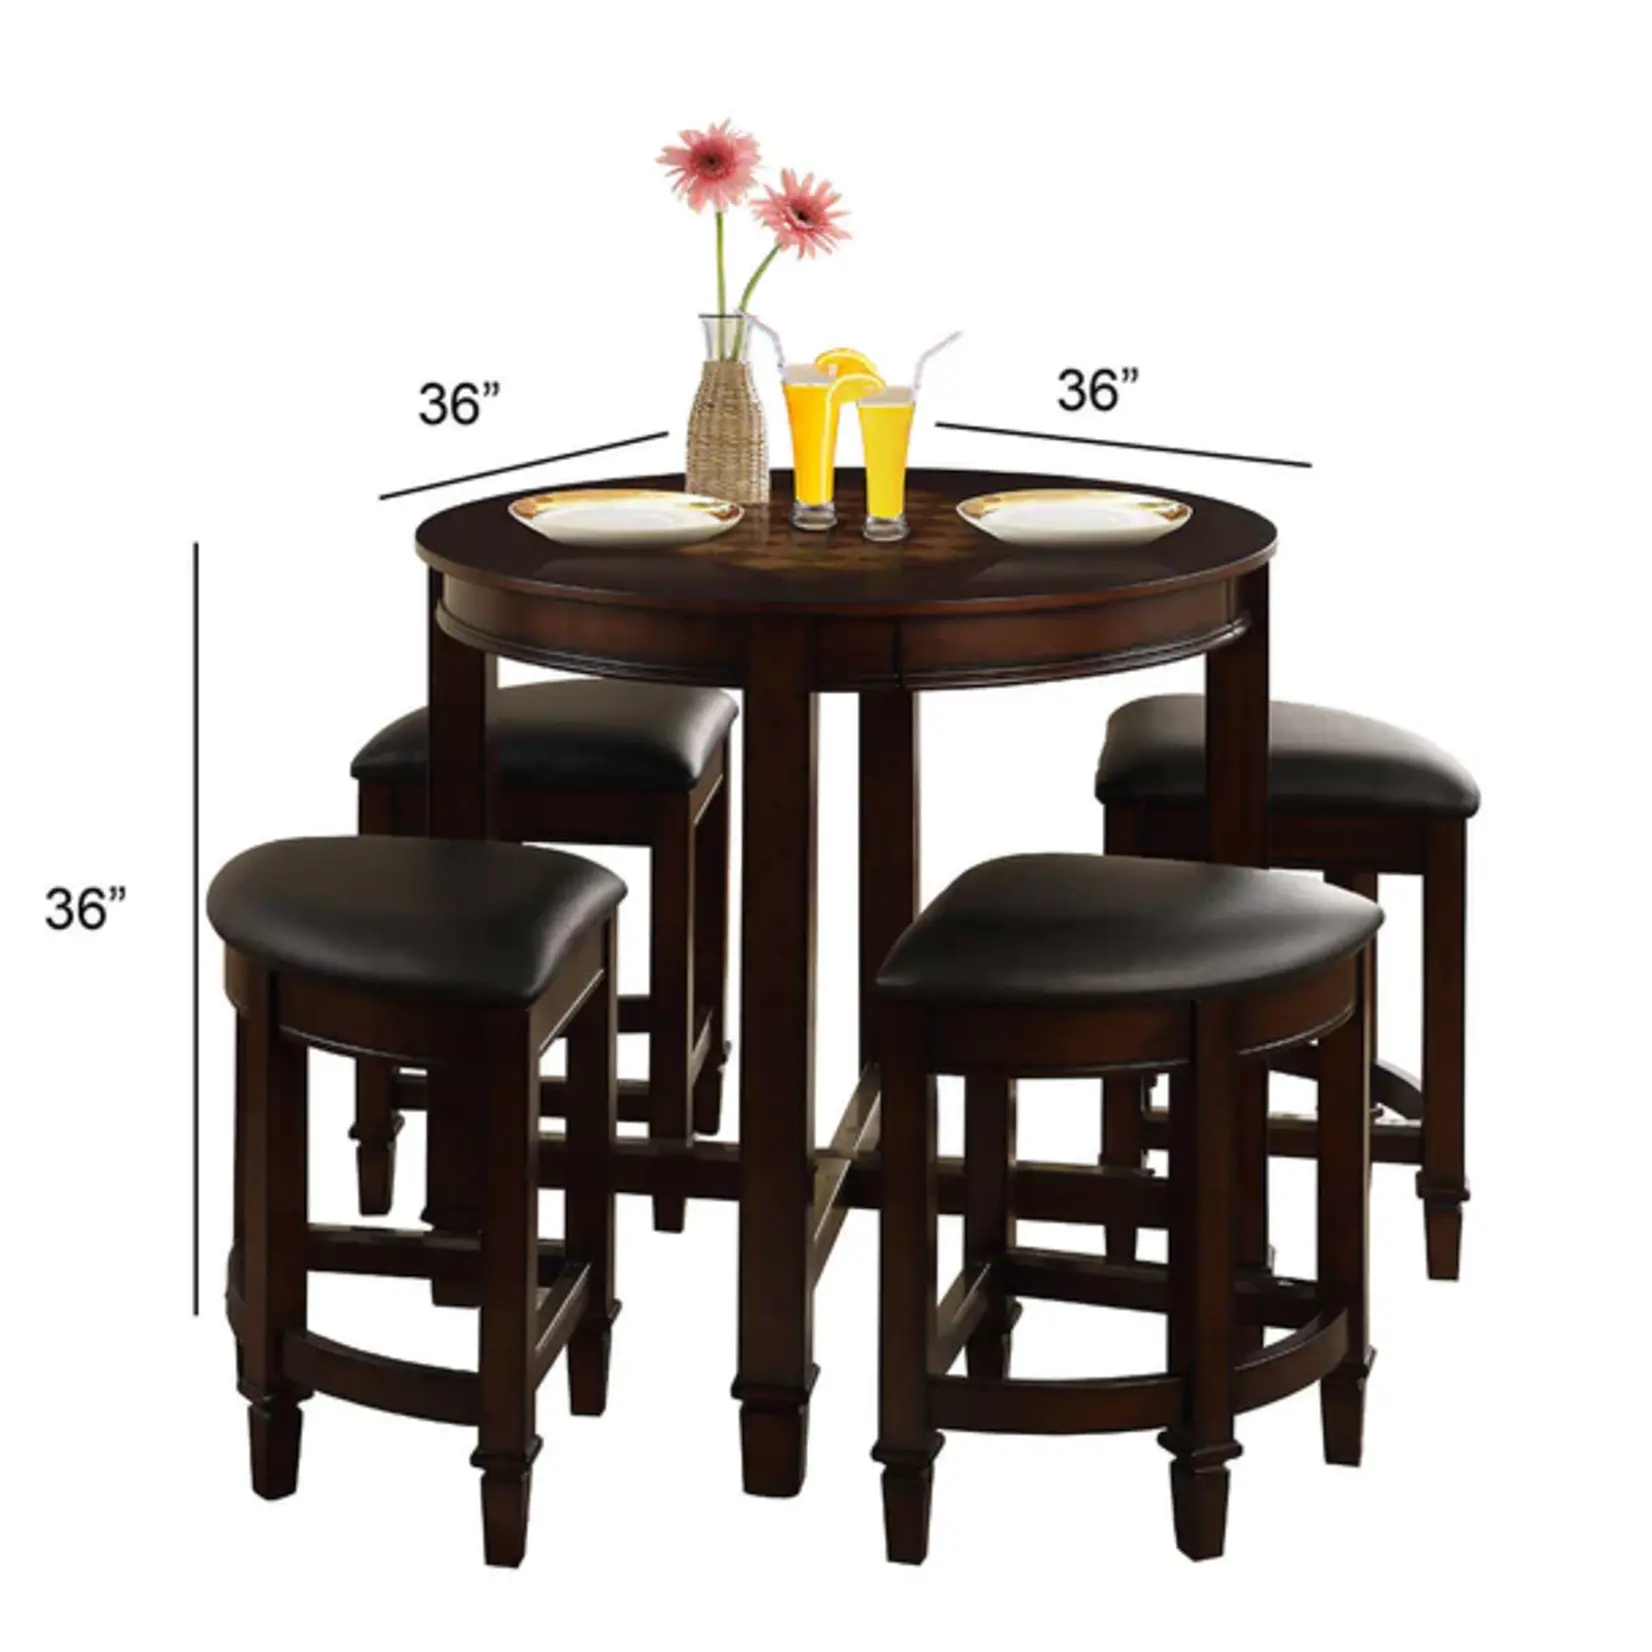 Well Universal Gaming Table - 5pcs -